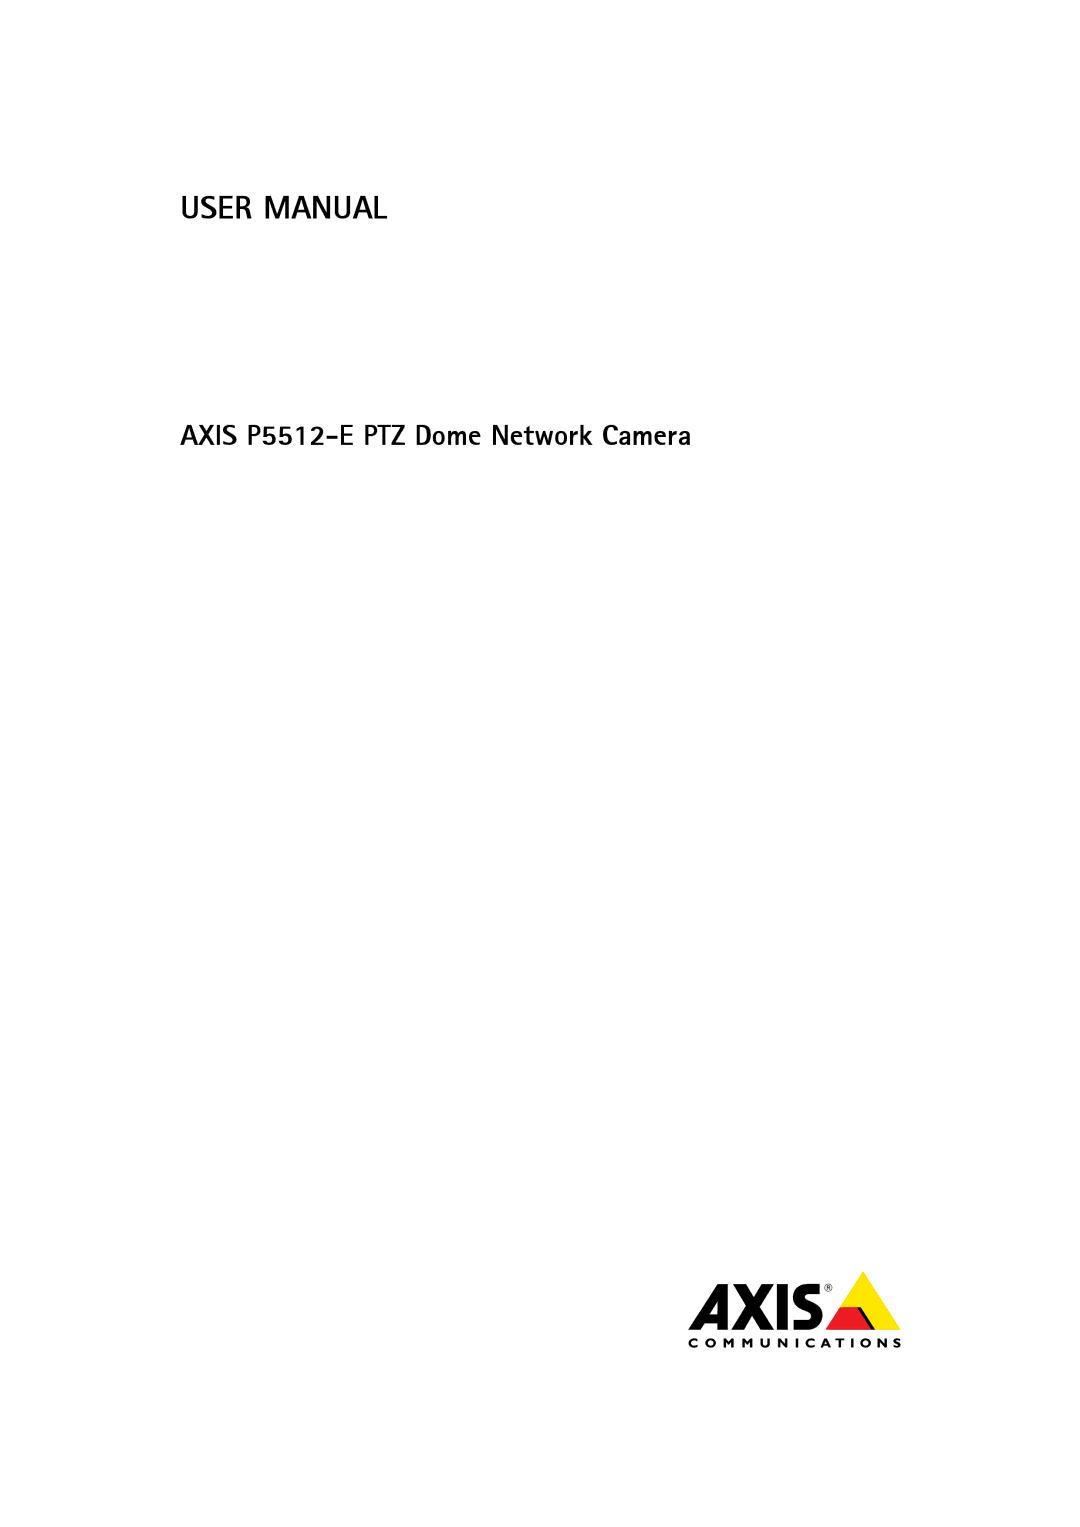 Axis Communications user manual Axis P5512-E PTZ Dome Network Camera 